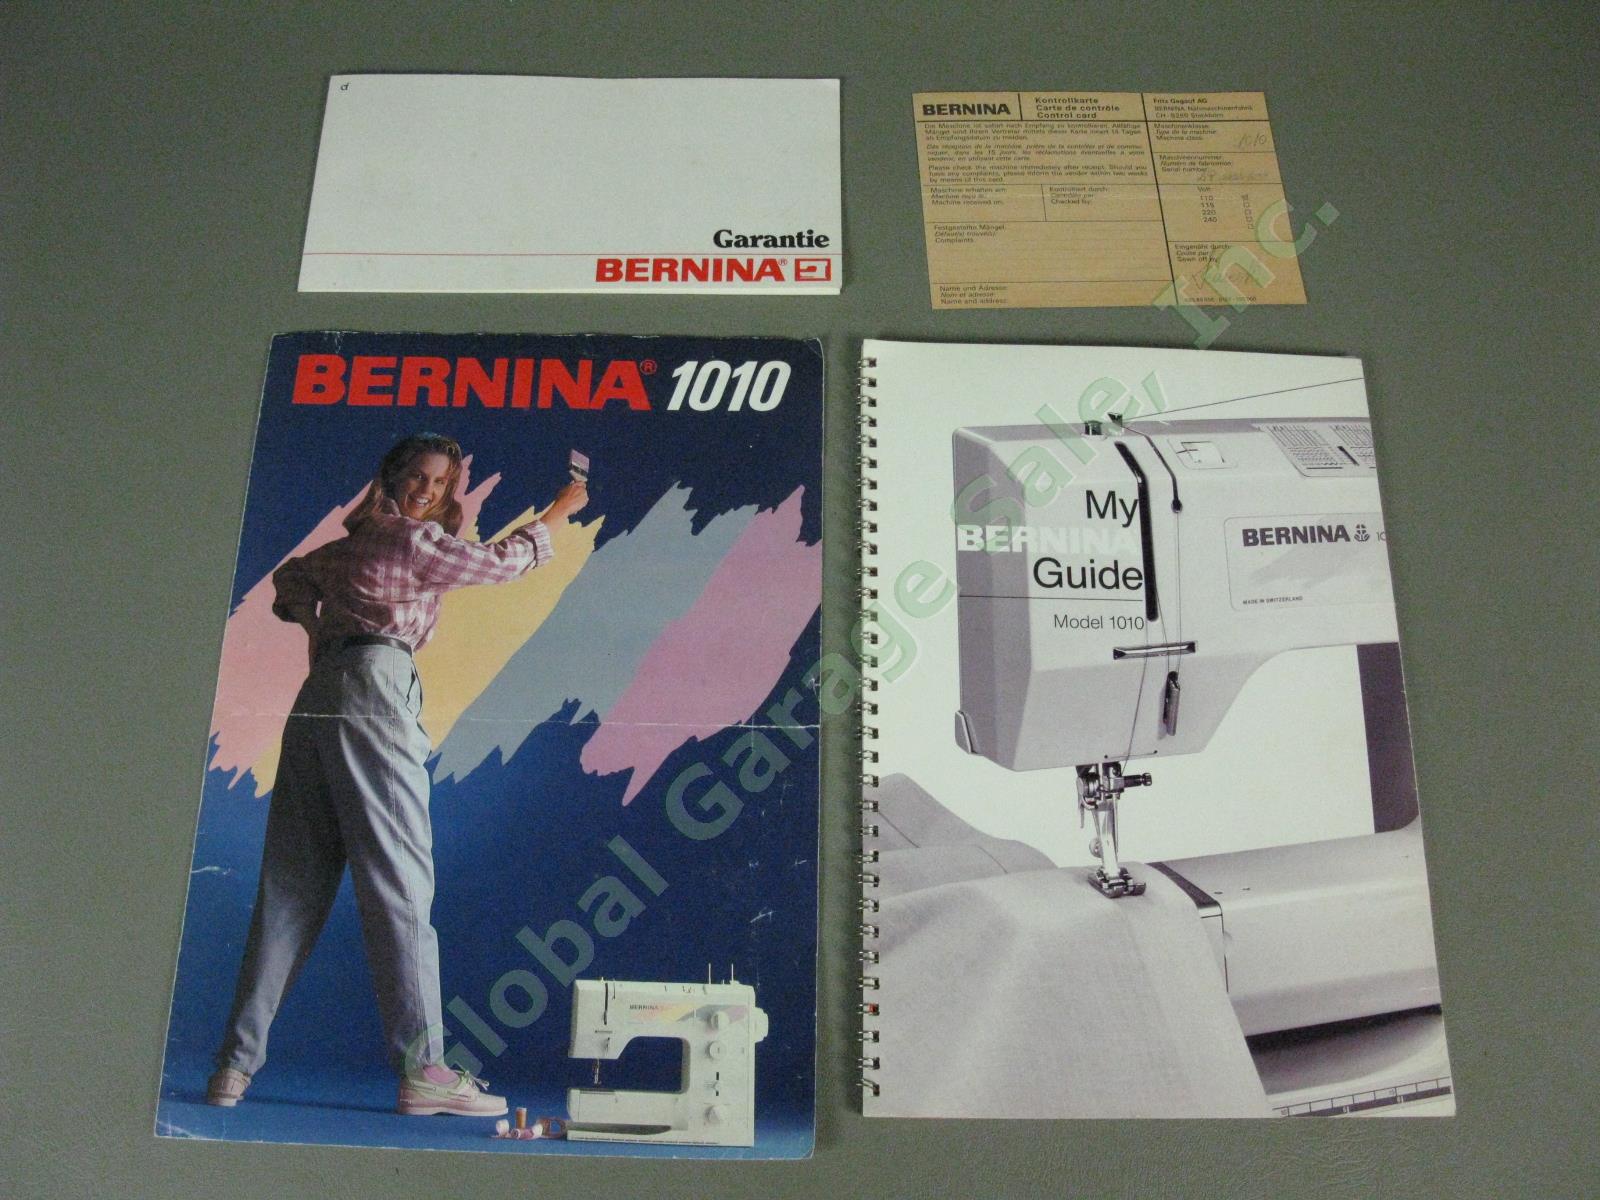 Bernina 1010 Sewing Machine w/Slide-On Extension Table Pedal Feet Manual Cover + 12